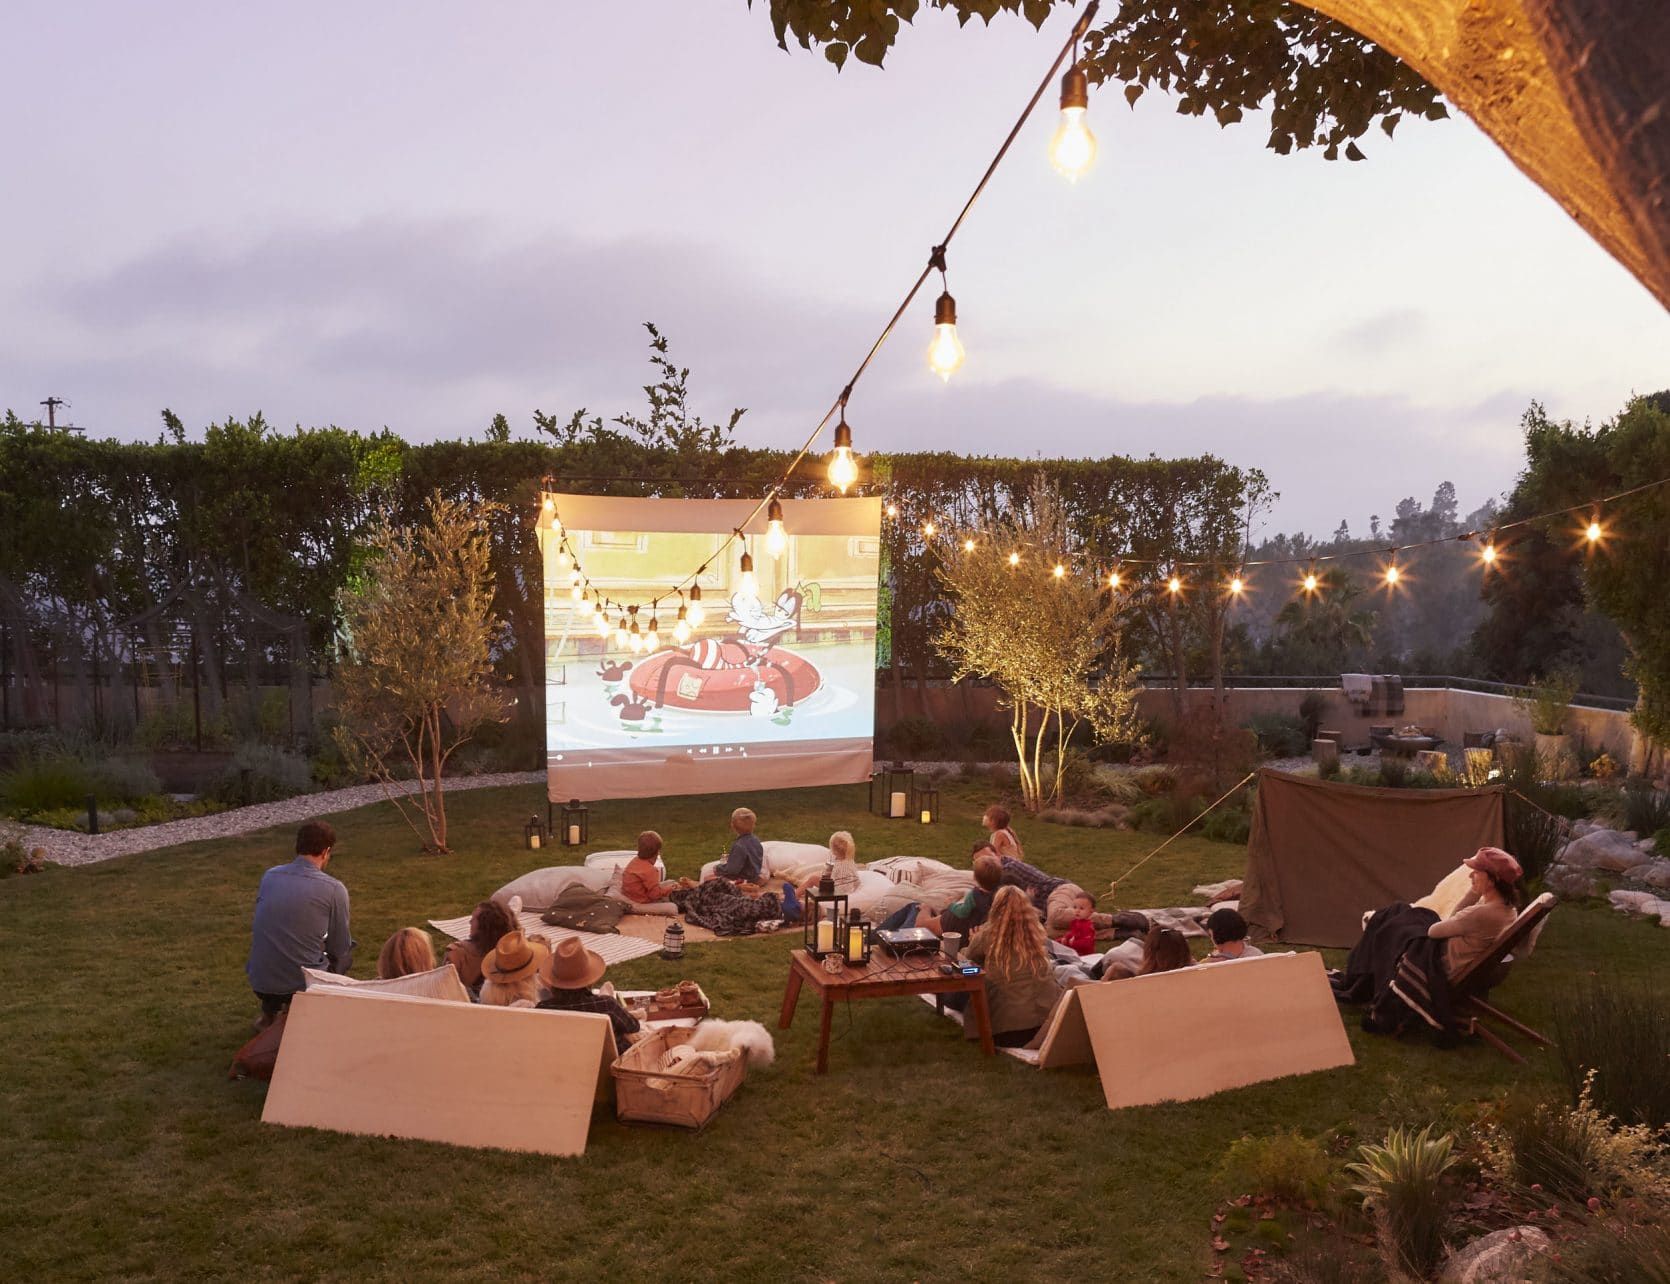 A group of people sitting on blankets in a garden with cartoons being played on an projector.